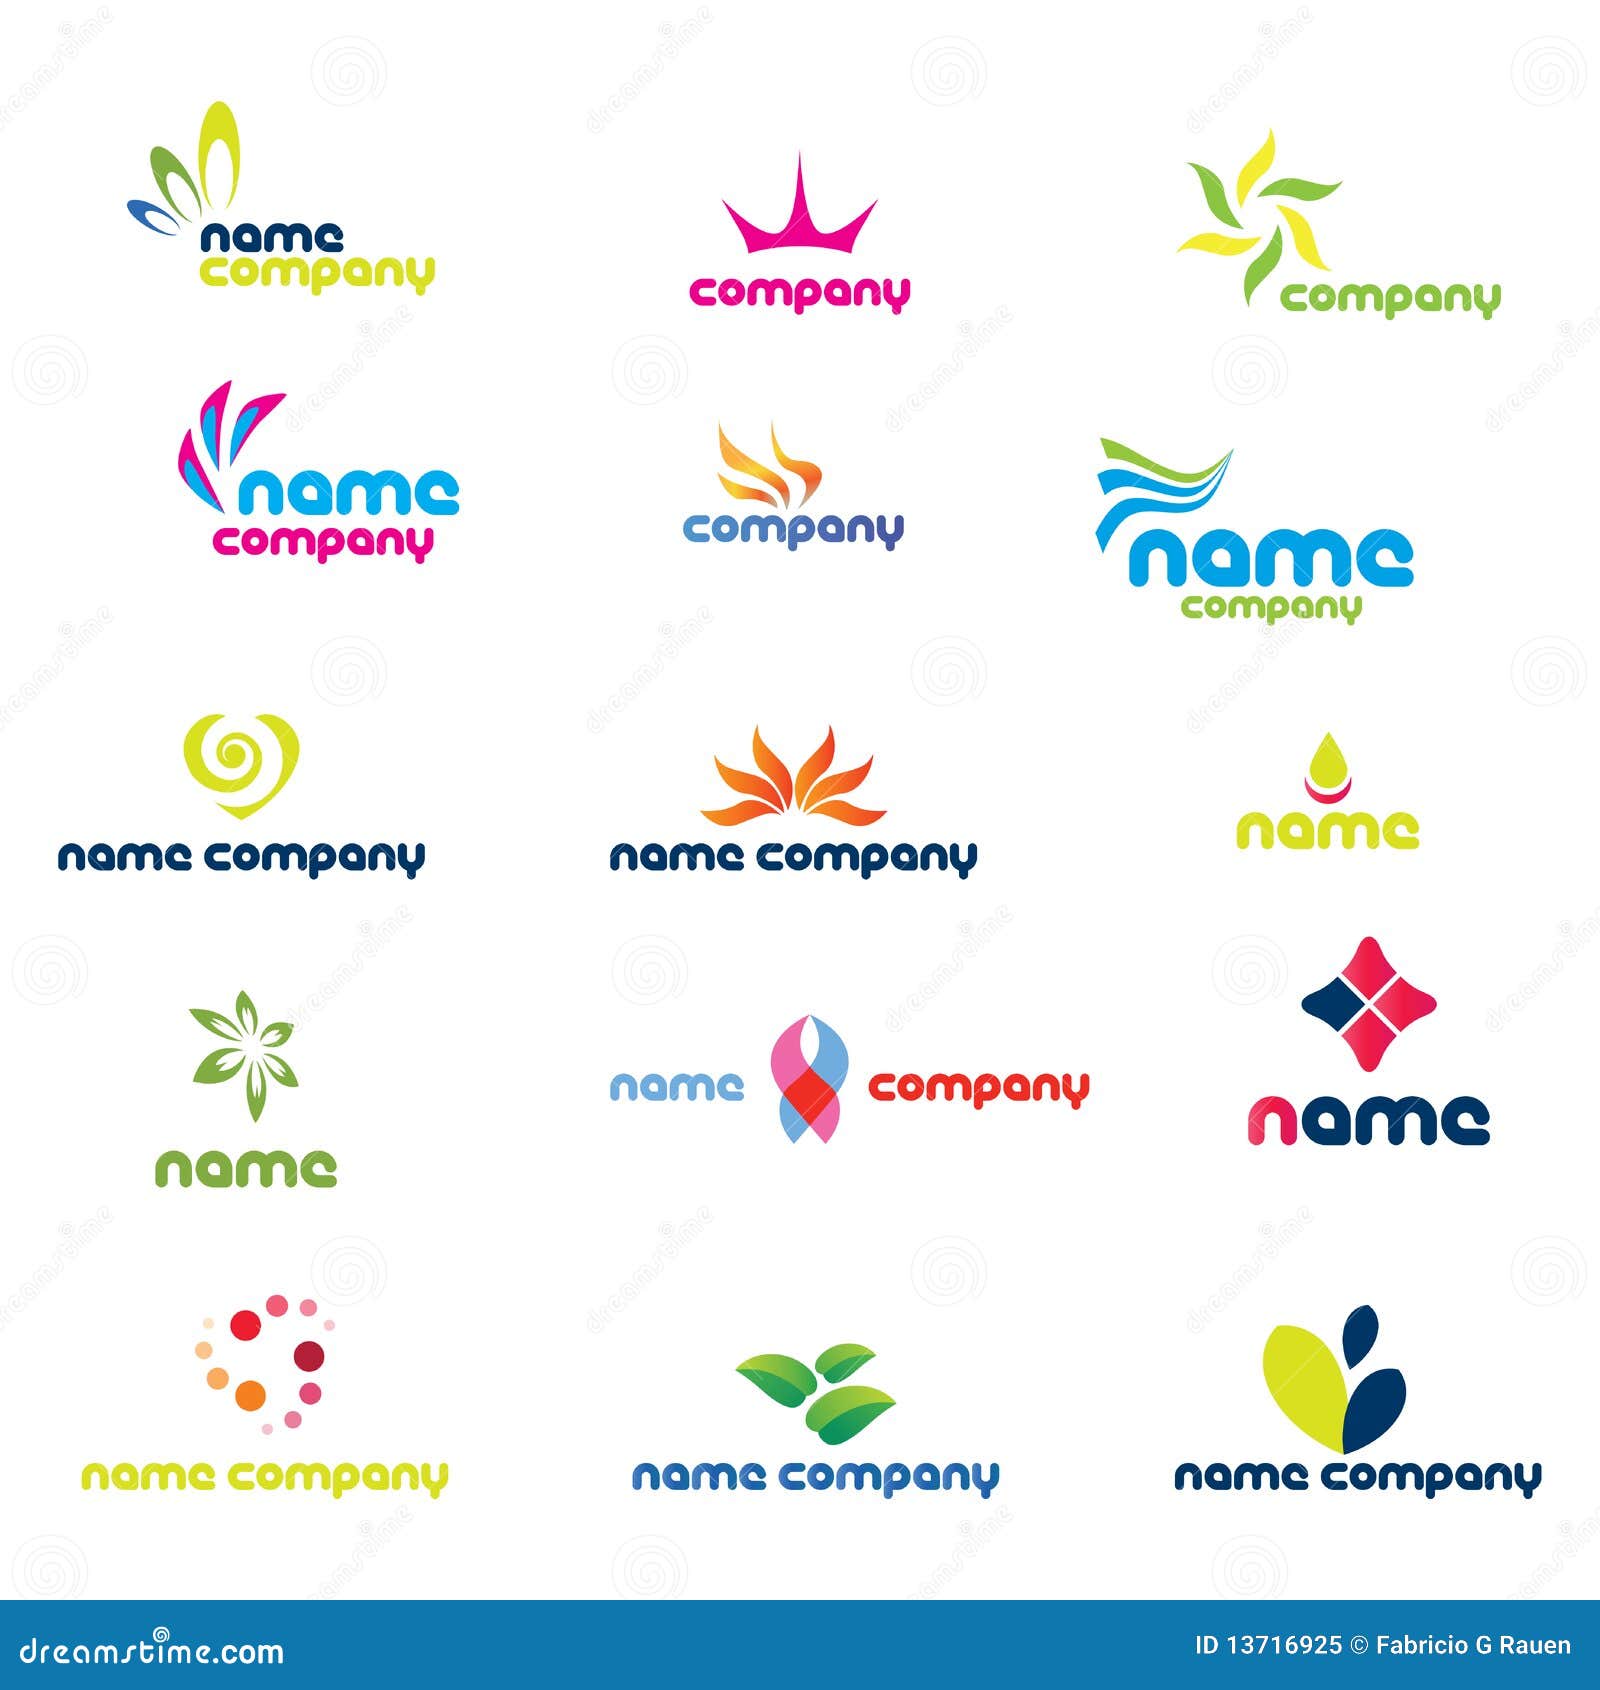 List Of Company Logos With Names